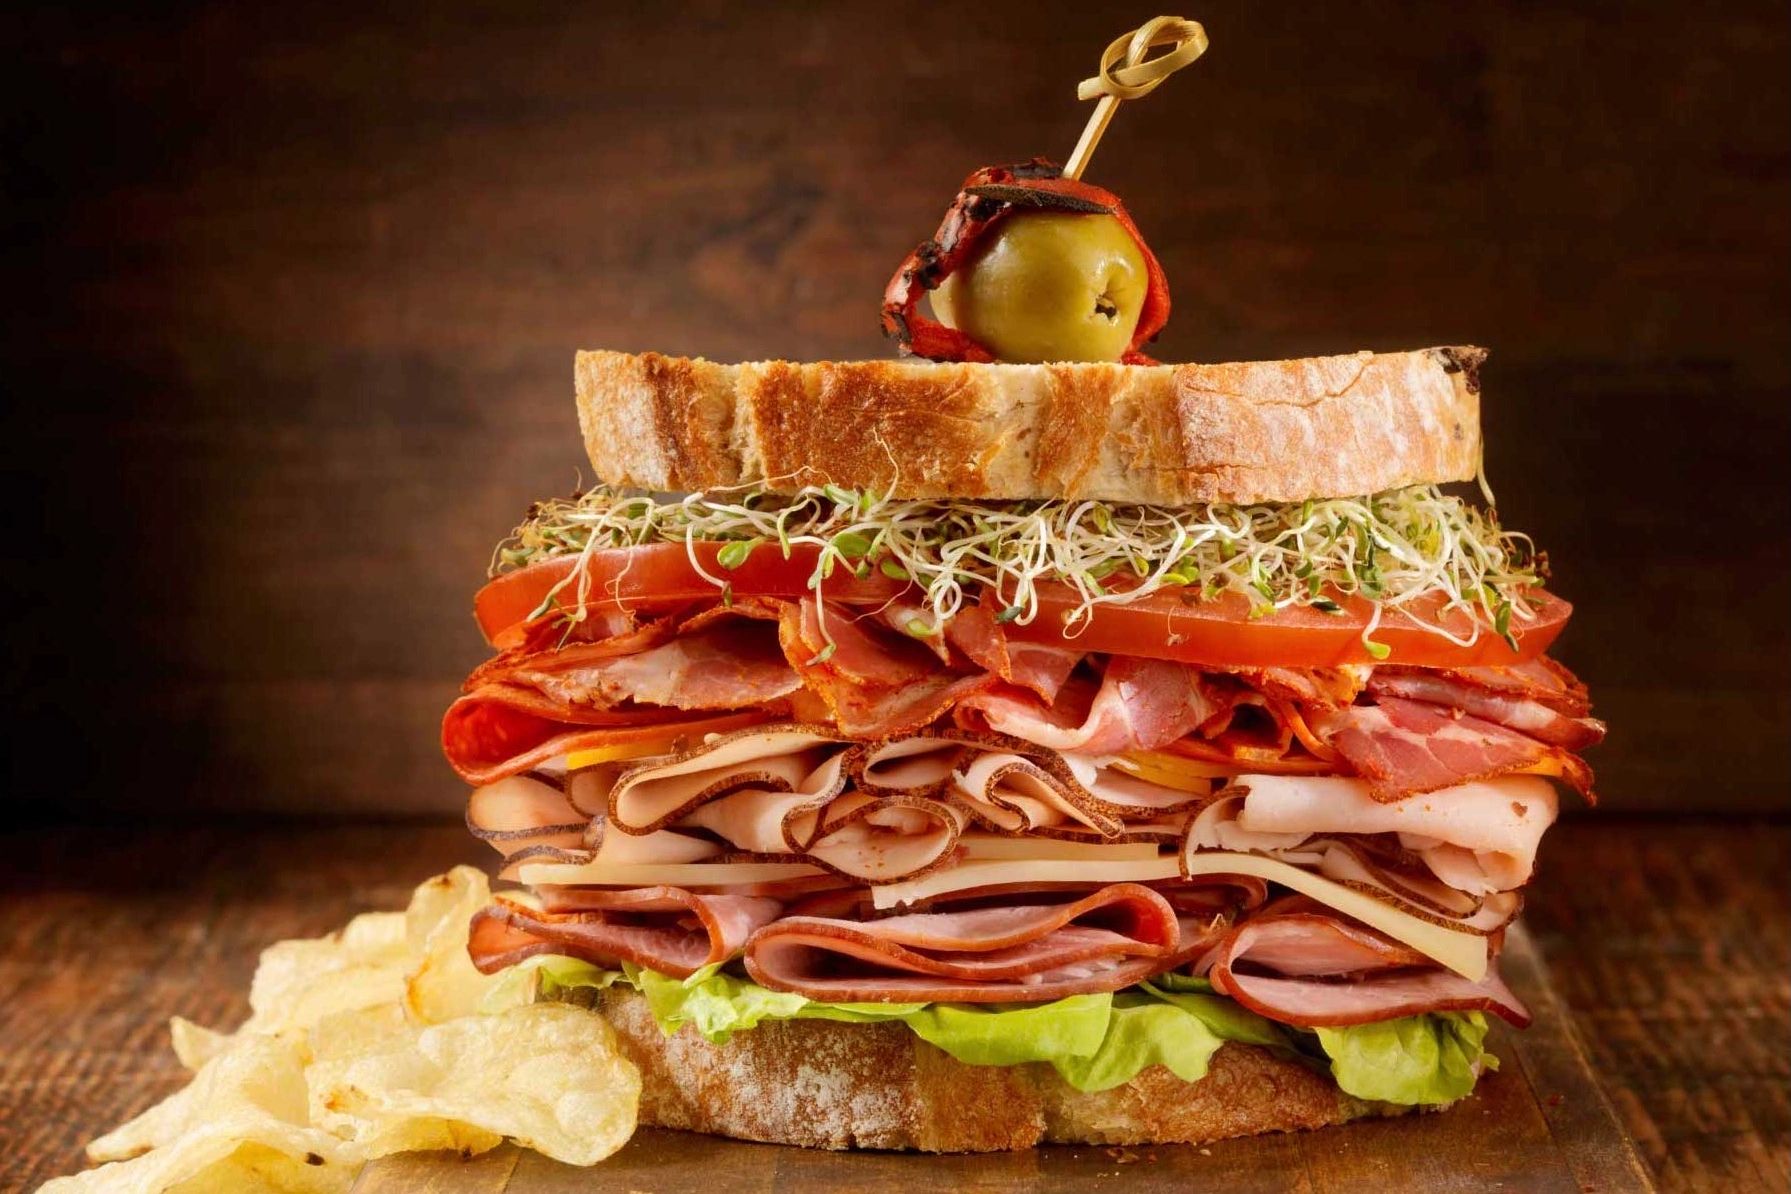 A delicious deli meat and salad sandwich, with crisps and olives on the side.